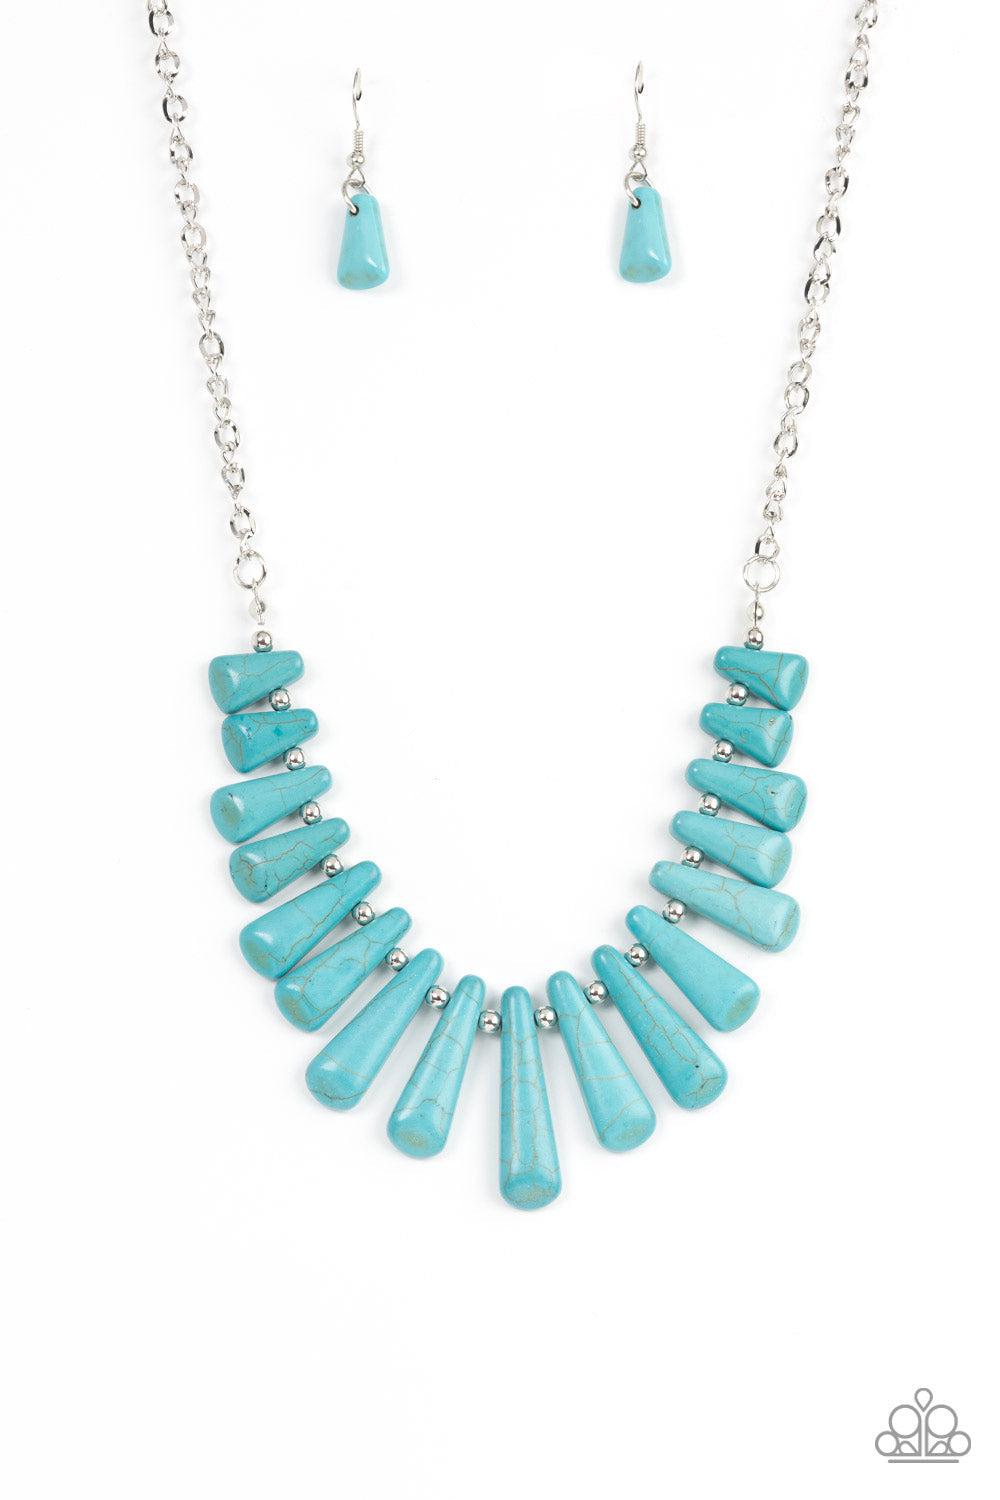 Mojave Empress Turquoise Blue Stone Necklace - Paparazzi Accessories- lightbox - CarasShop.com - $5 Jewelry by Cara Jewels